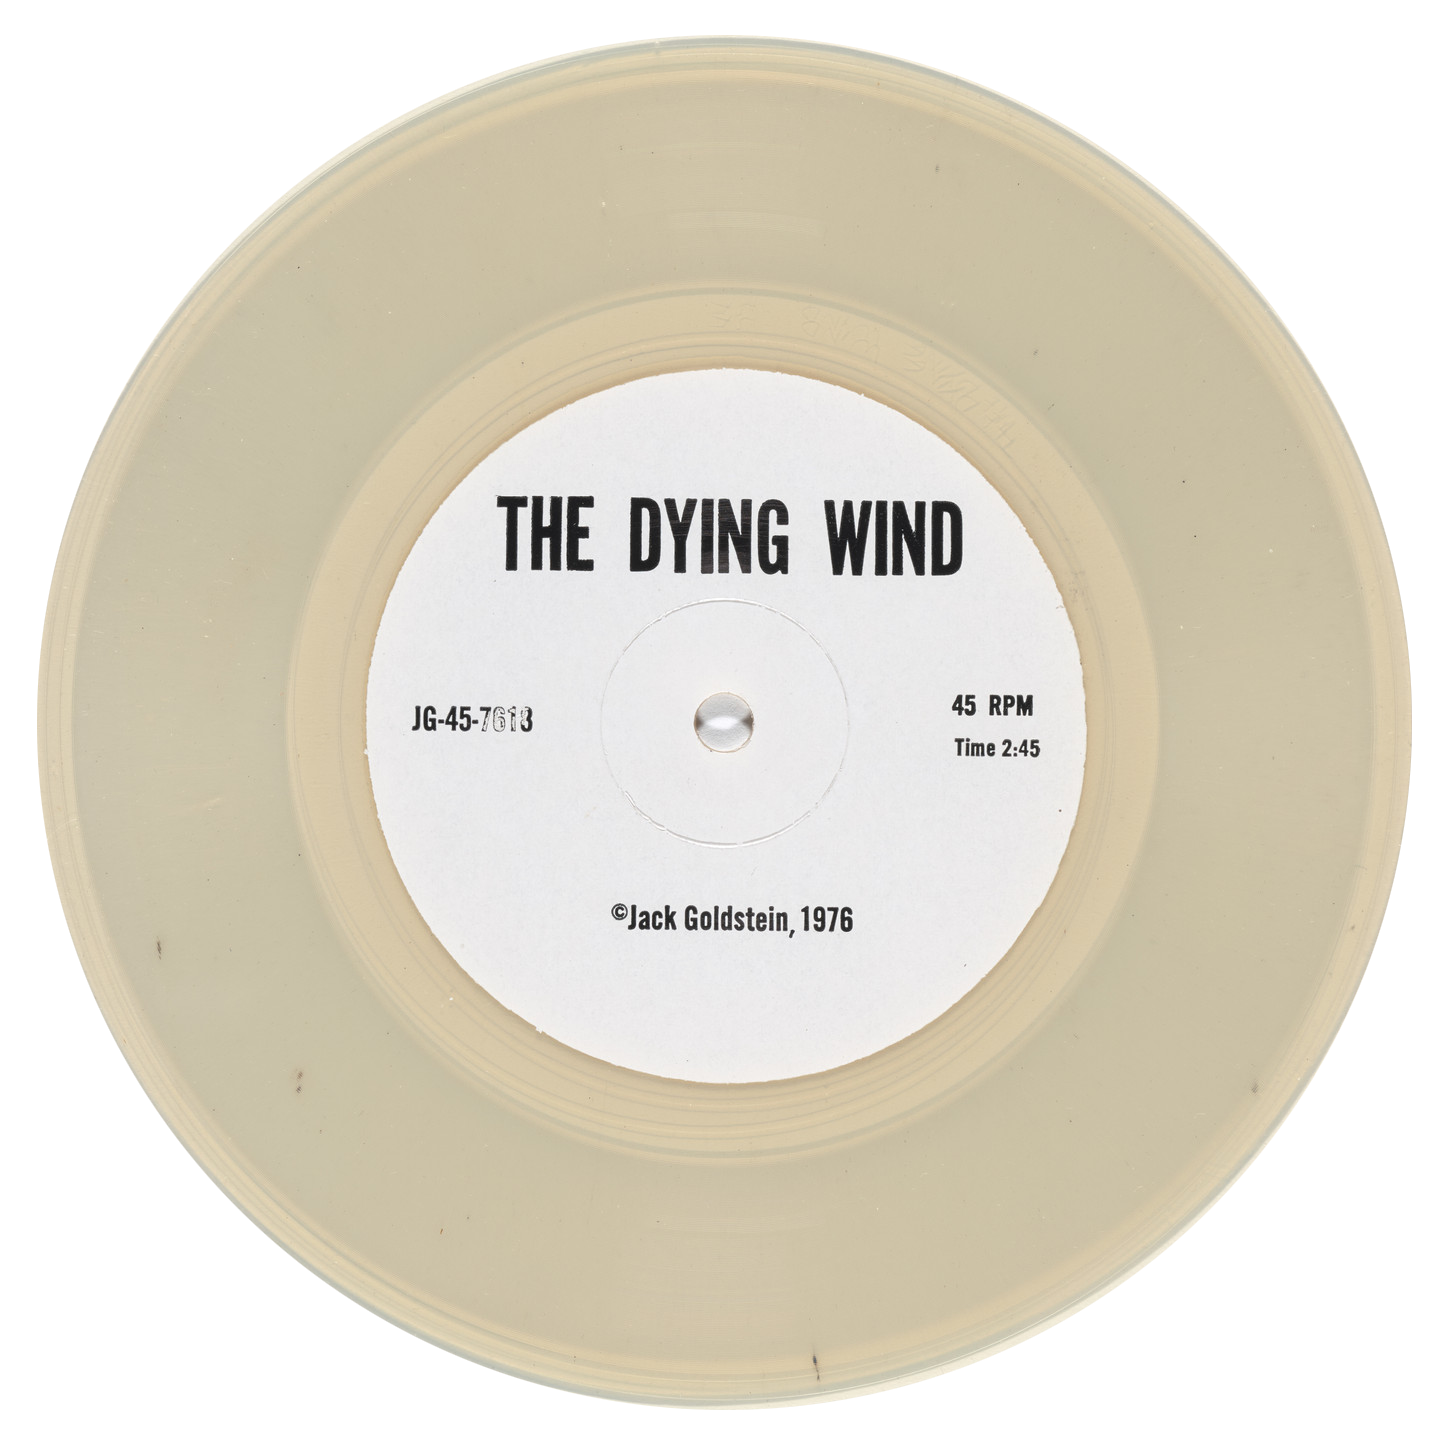  The DYing Wing
Clear vinyl - 45 rpm 7-inch record

The Dying Wing est un des neuf éléments constitutifs de :
A Suite of Nine 45 rpm 7-Inch Records with Sound Effects
1976